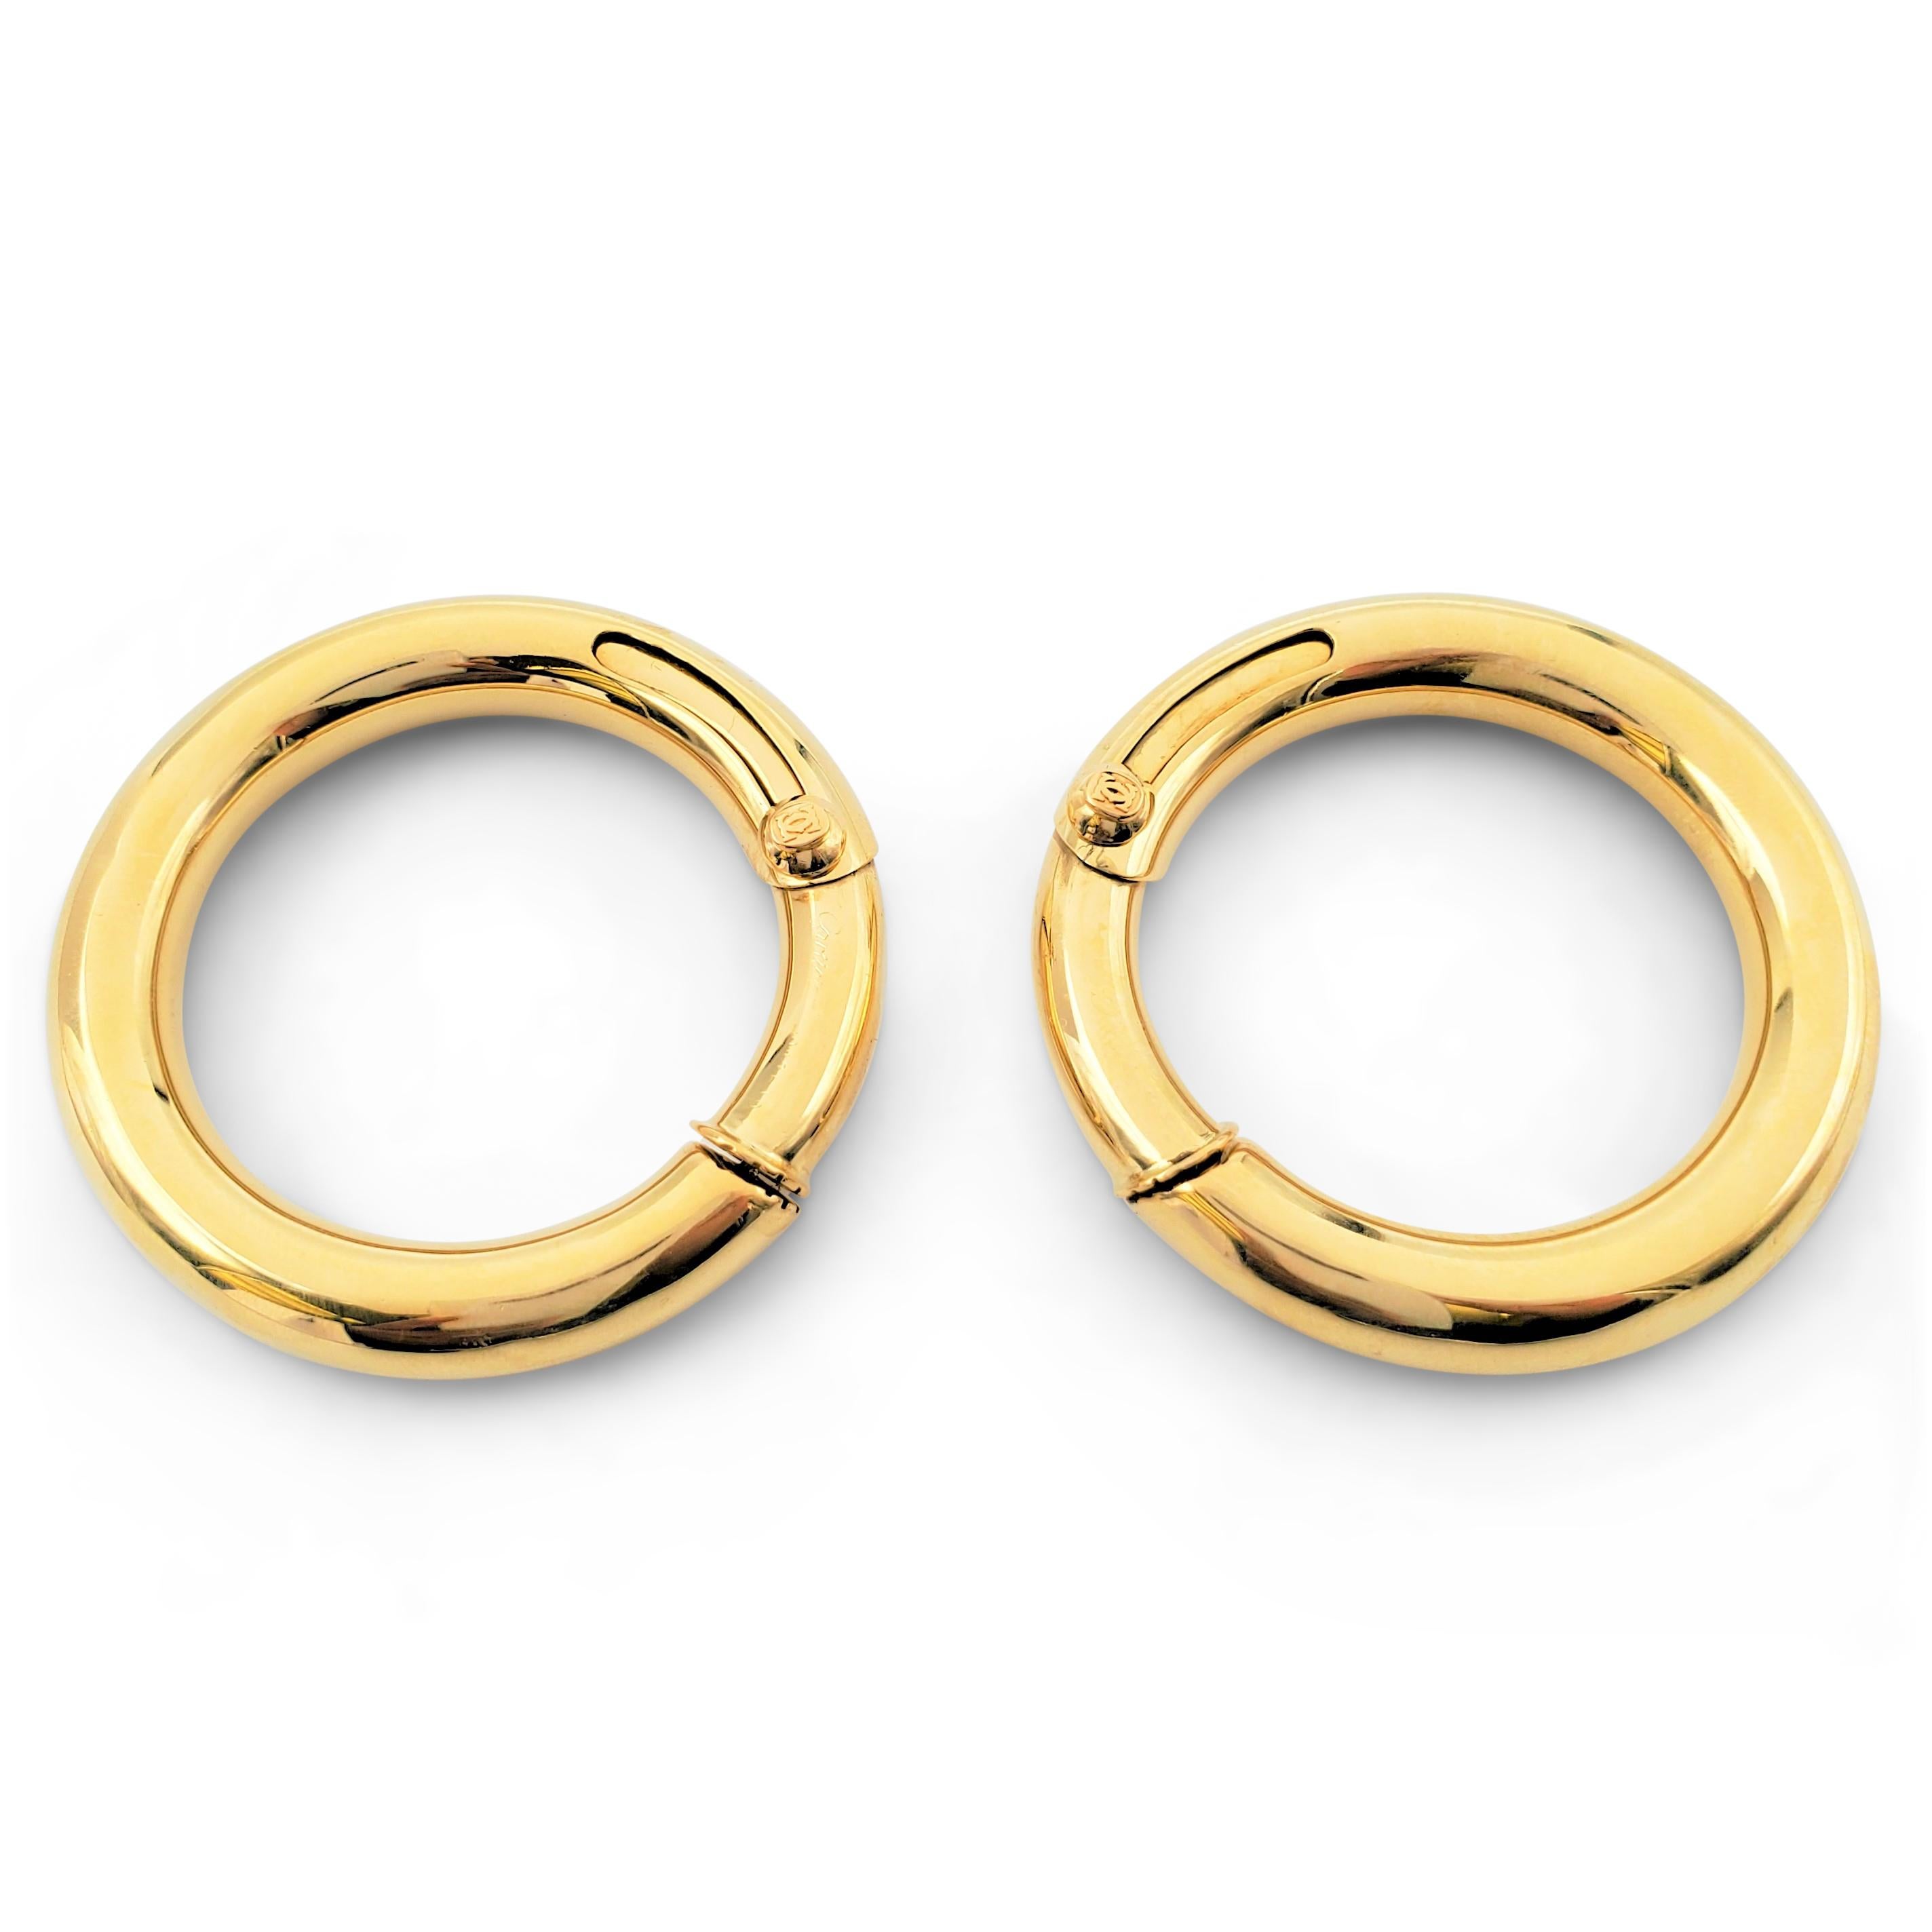 Authentic vintage Cartier hoop earrings crafted in 18 karat yellow gold feature a sliding cover hidden post. Signed Cartier, 750, with serial number. Both the signature and serial number are rubbed. Not presented with the original box or papers.